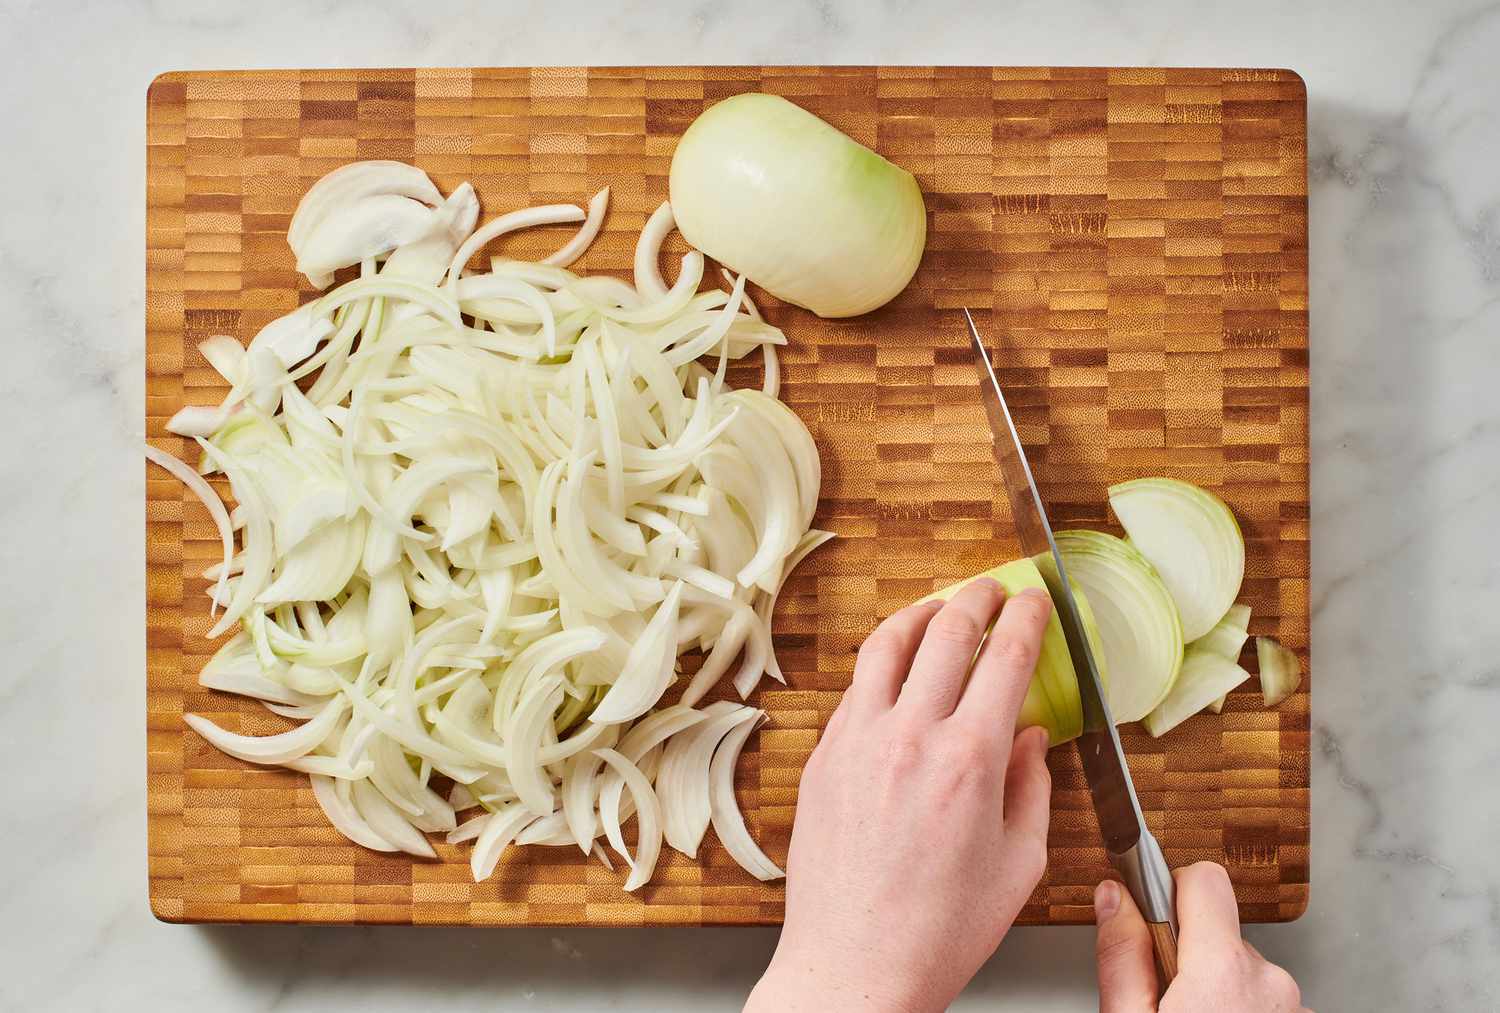 s top-rated vegetable slicer can help you cut onions